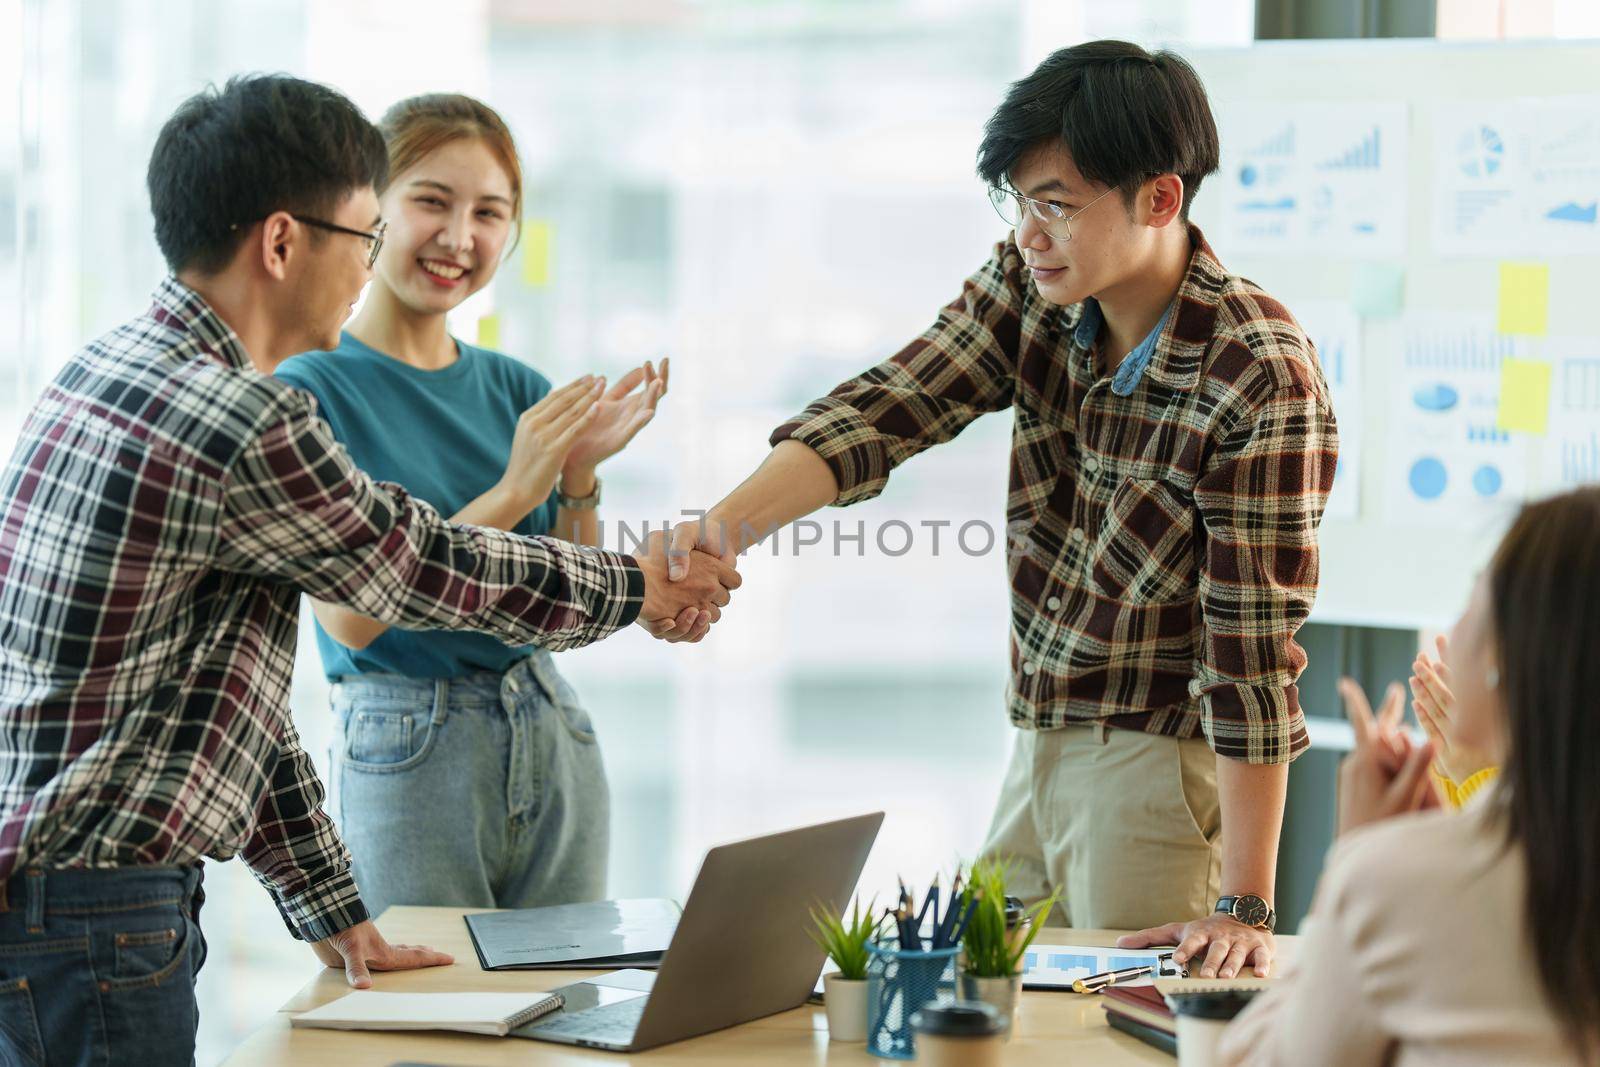 Business people successful negotiation and handshake. celebration partnership and teamwork, business deal concept. by itchaznong